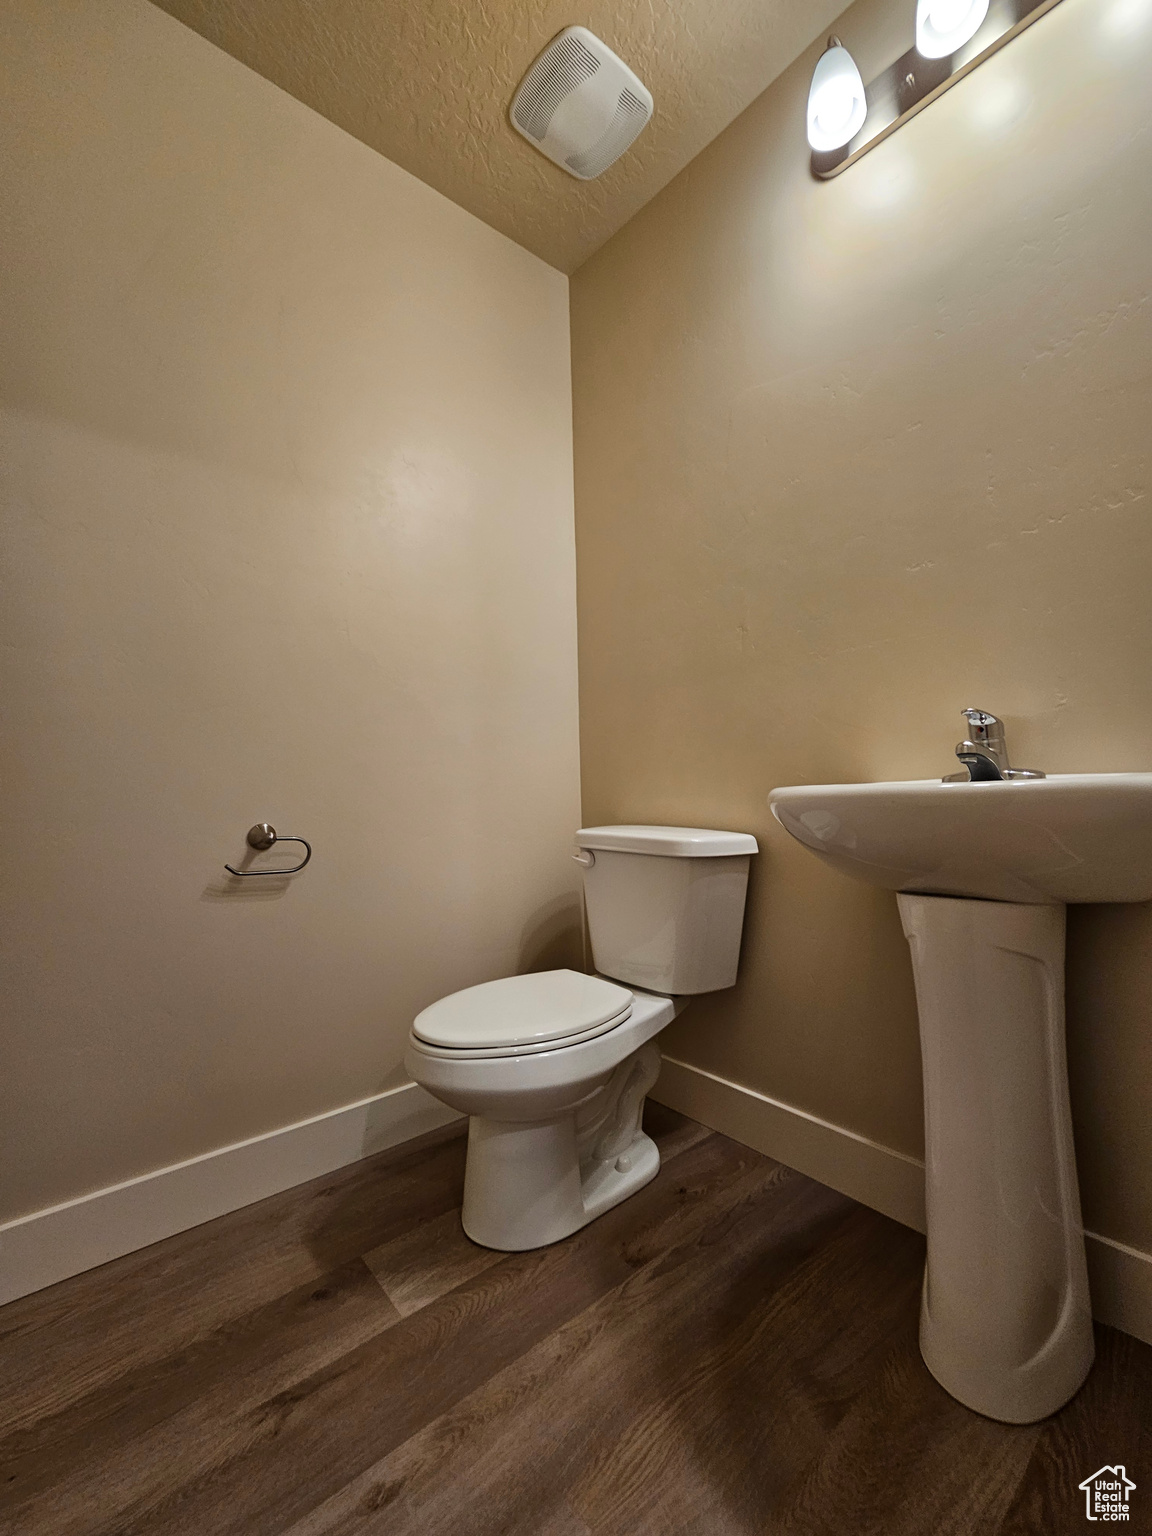 Bathroom featuring a textured ceiling, toilet, and hardwood / wood-style floors